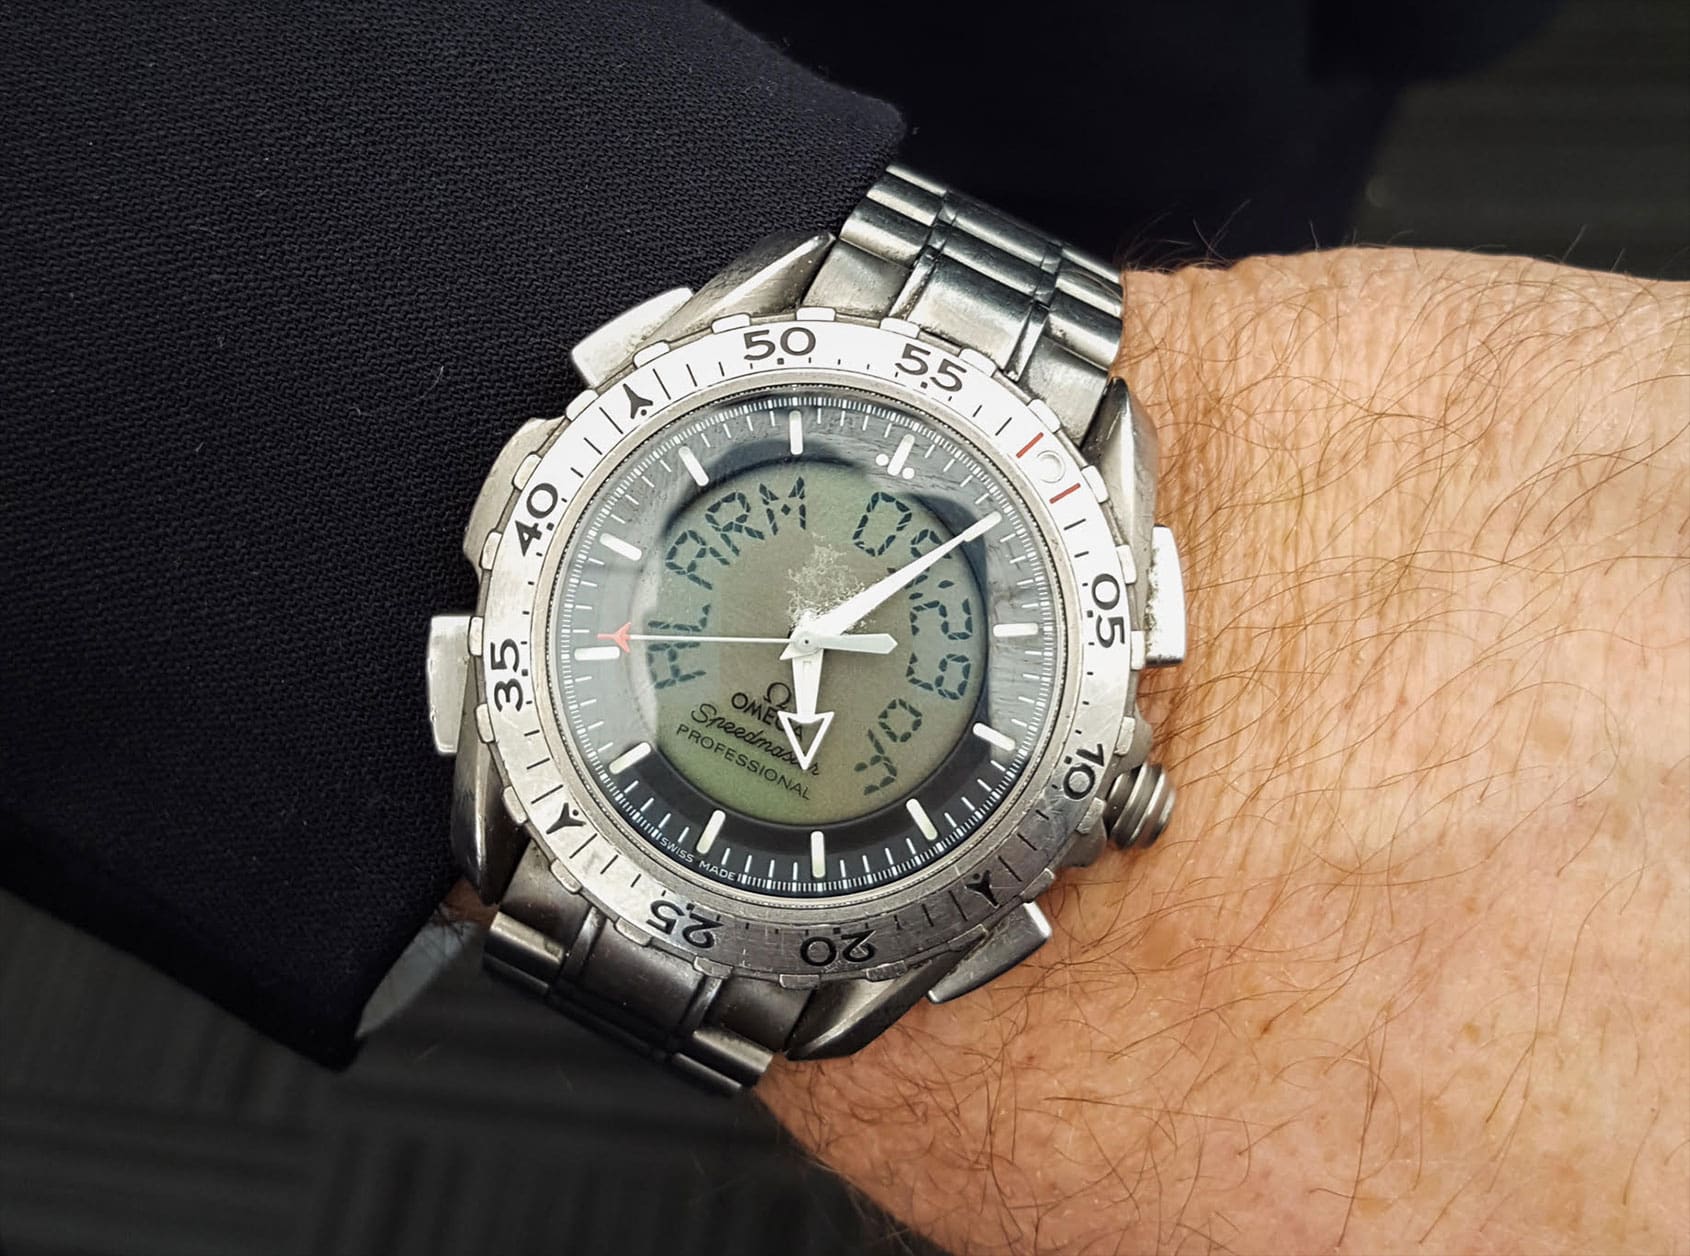 WATCHSPOTTING: Ron’s beaten-up Omega is cooler than yours – or has your Speedmaster X-33 been into space?